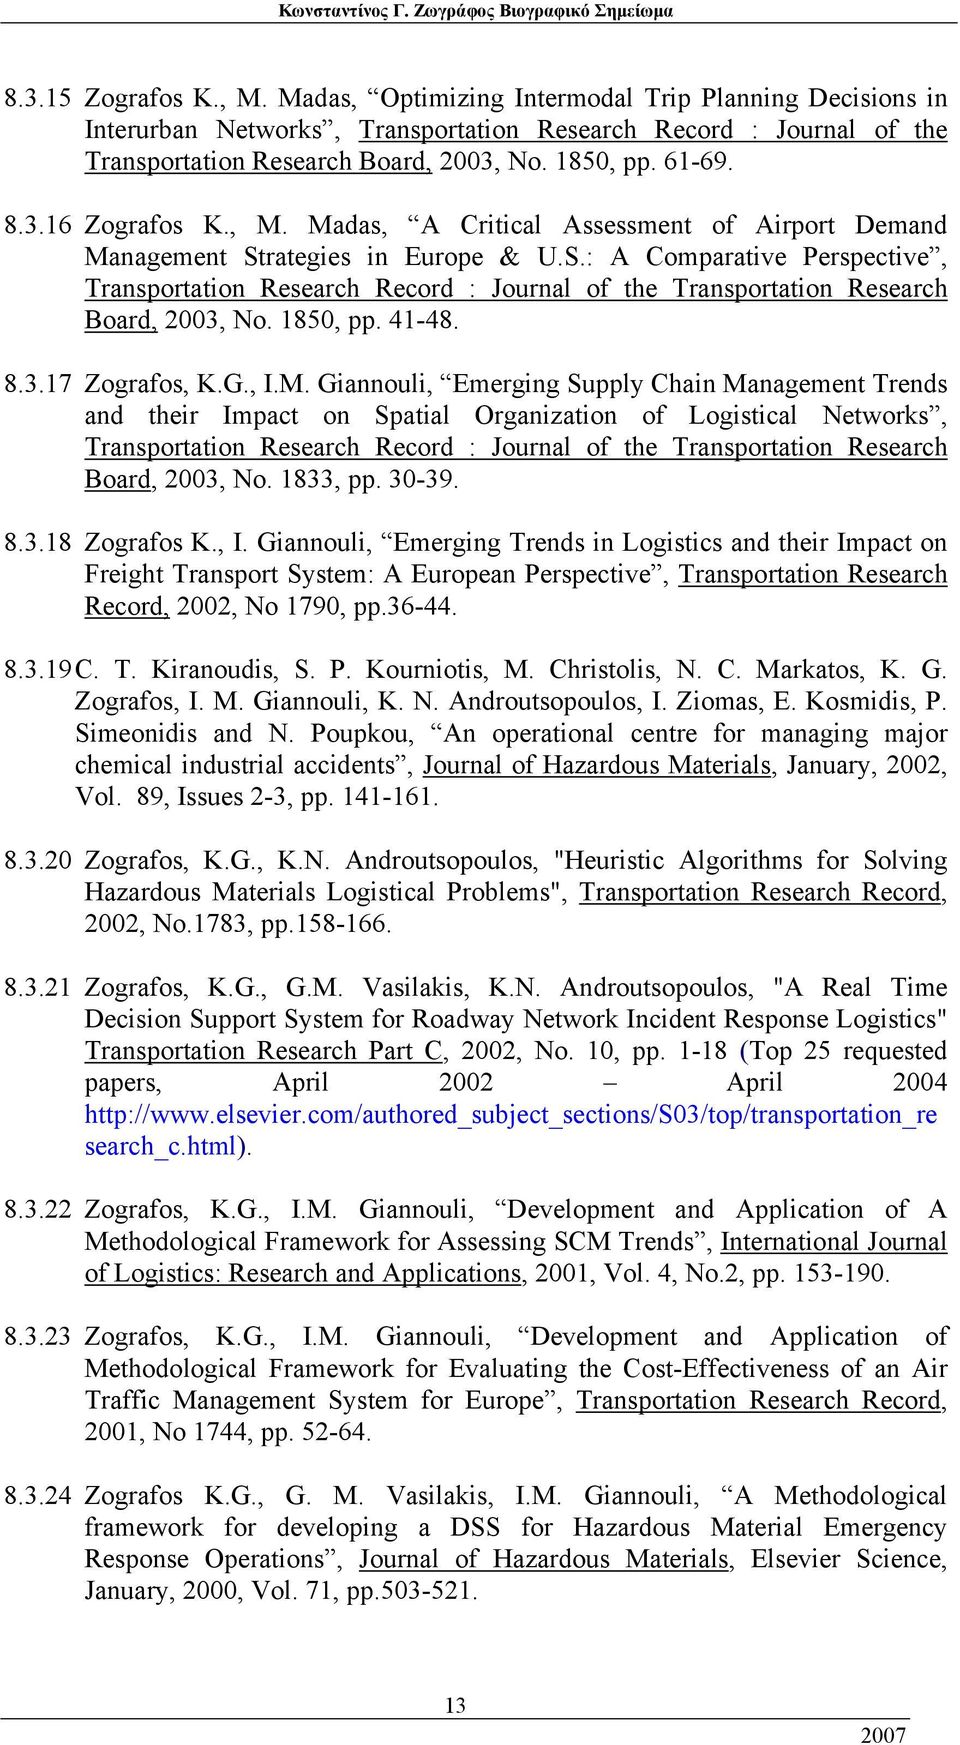 rategies in Europe & U.S.: A Comparative Perspective, Transportation Research Record : Journal of the Transportation Research Board, 2003, No. 1850, pp. 41-48. 8.3.17 Zografos, K.G., I.M.